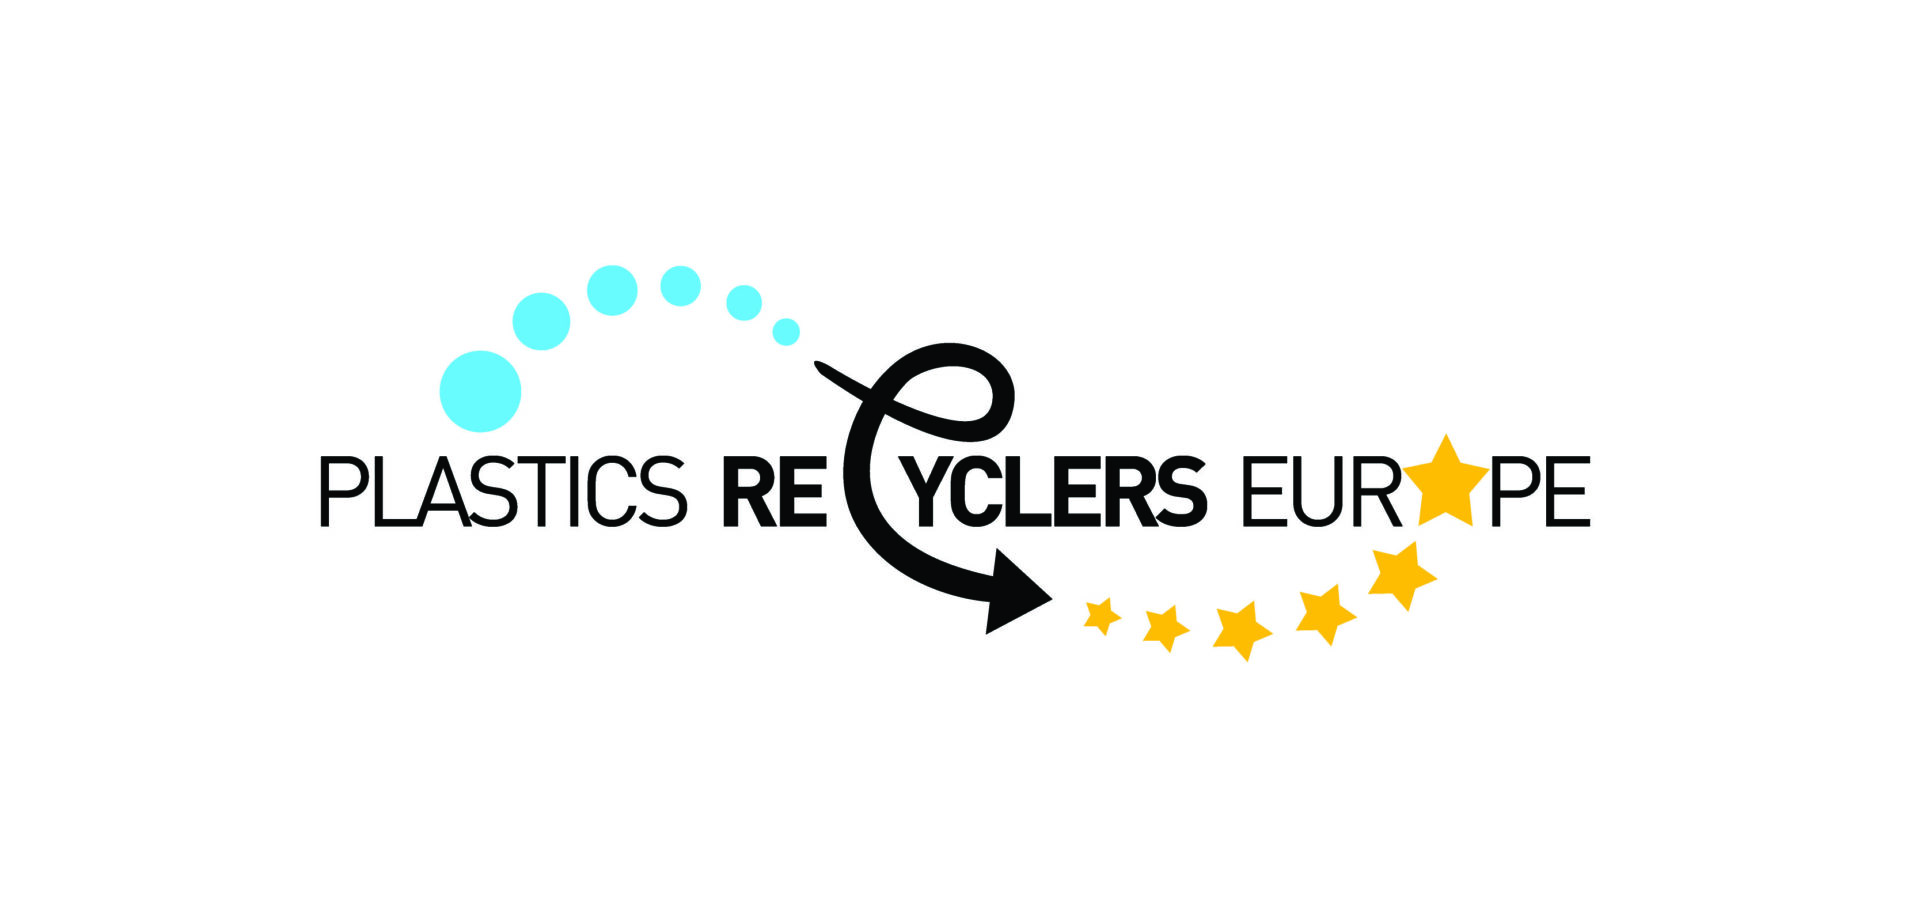 Plastics Recyclers Europe supports European Commissions Circular Economy Package